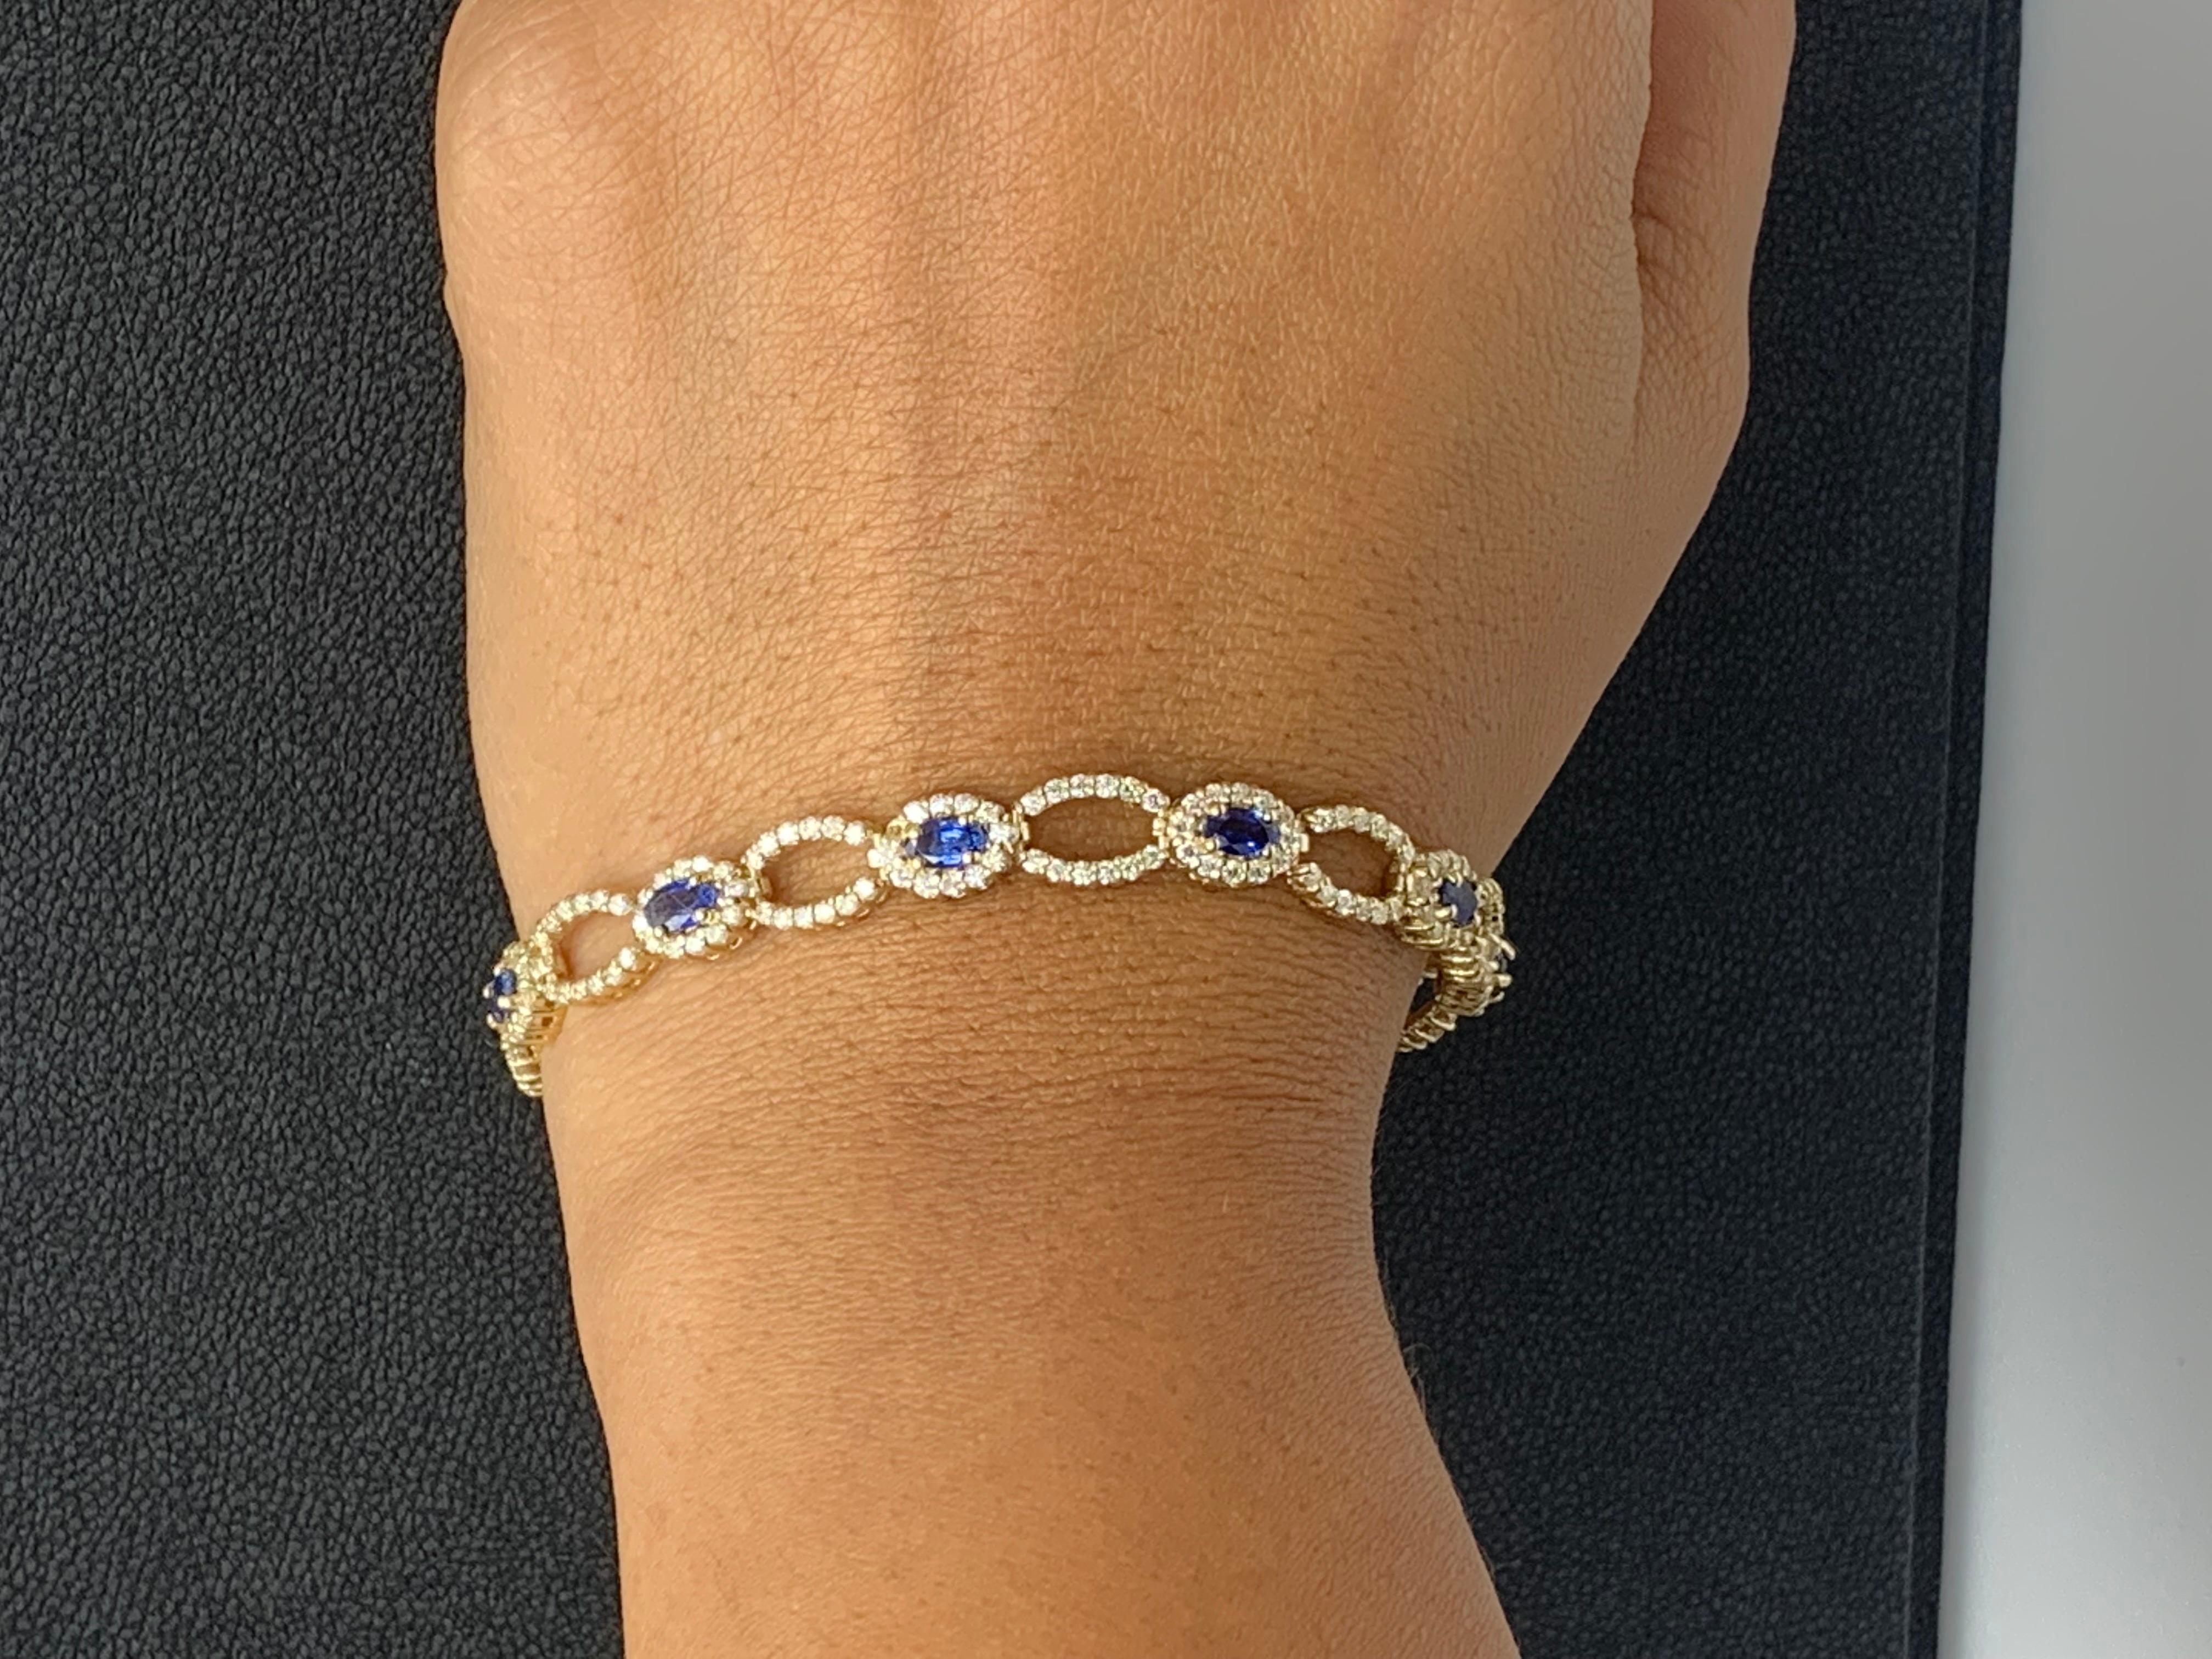 Open-Work 3.60 Carat Blue Sapphire and Diamond Bracelet in 14K Yellow Gold For Sale 10